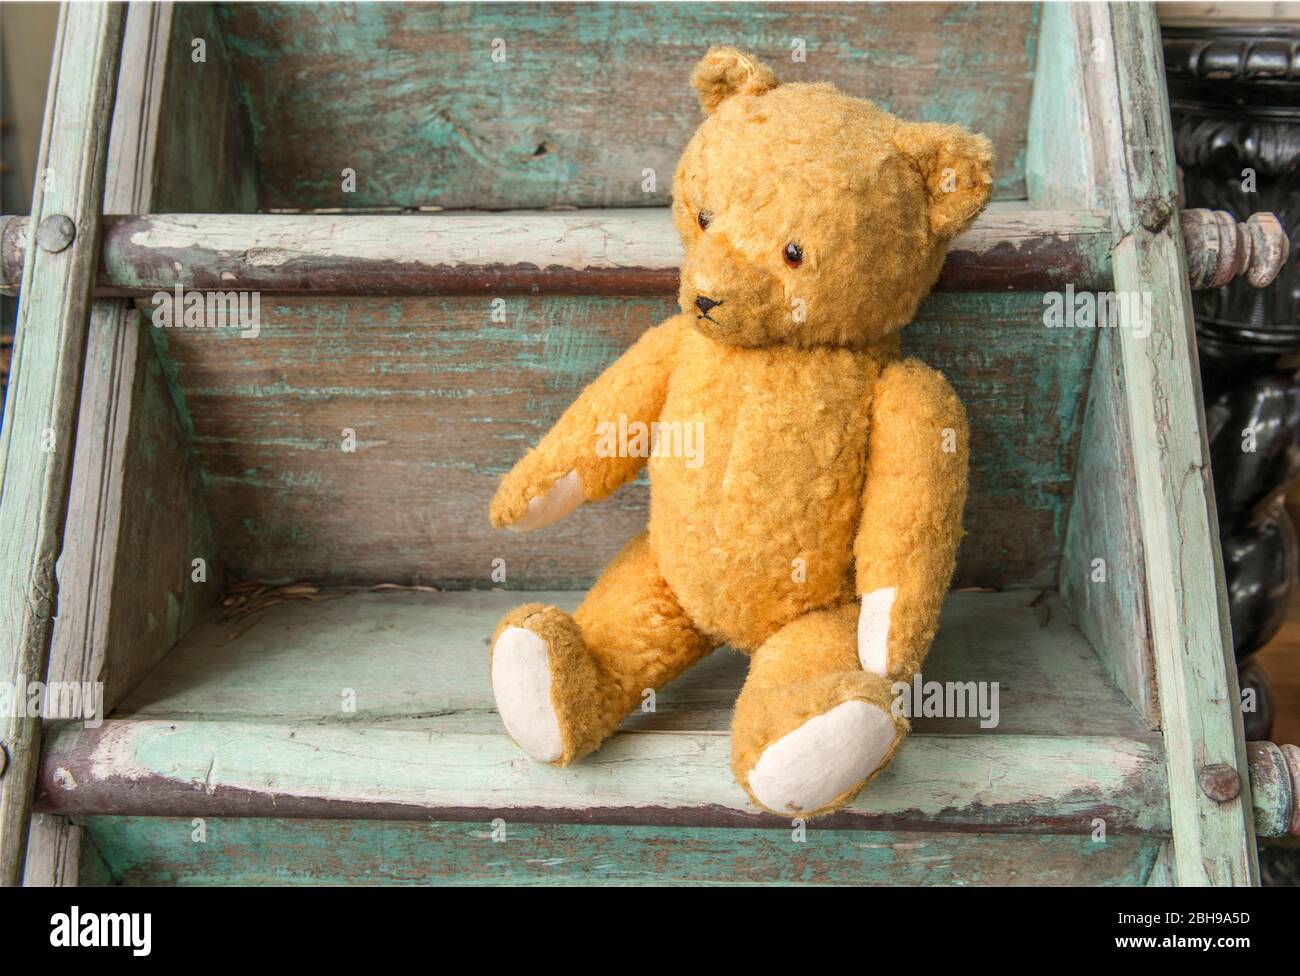 Teddy, stuffed bear, old, sitting, toy, wooden stairs, Stock Photo